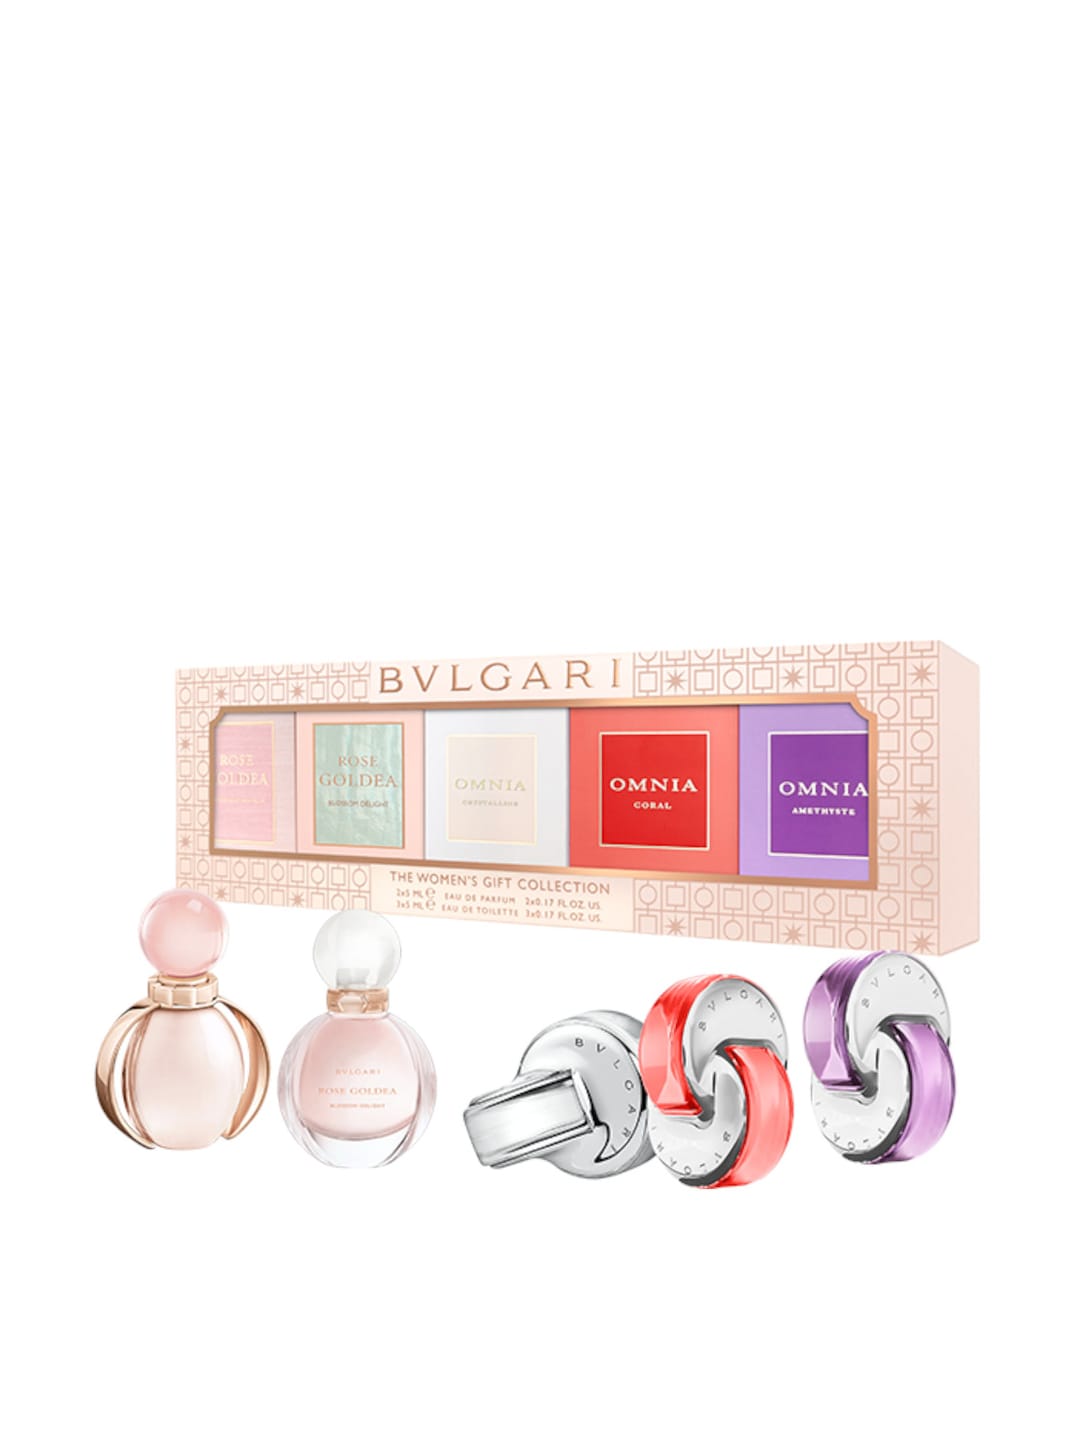 Bvlgari The Women's Gift Collection Price in India